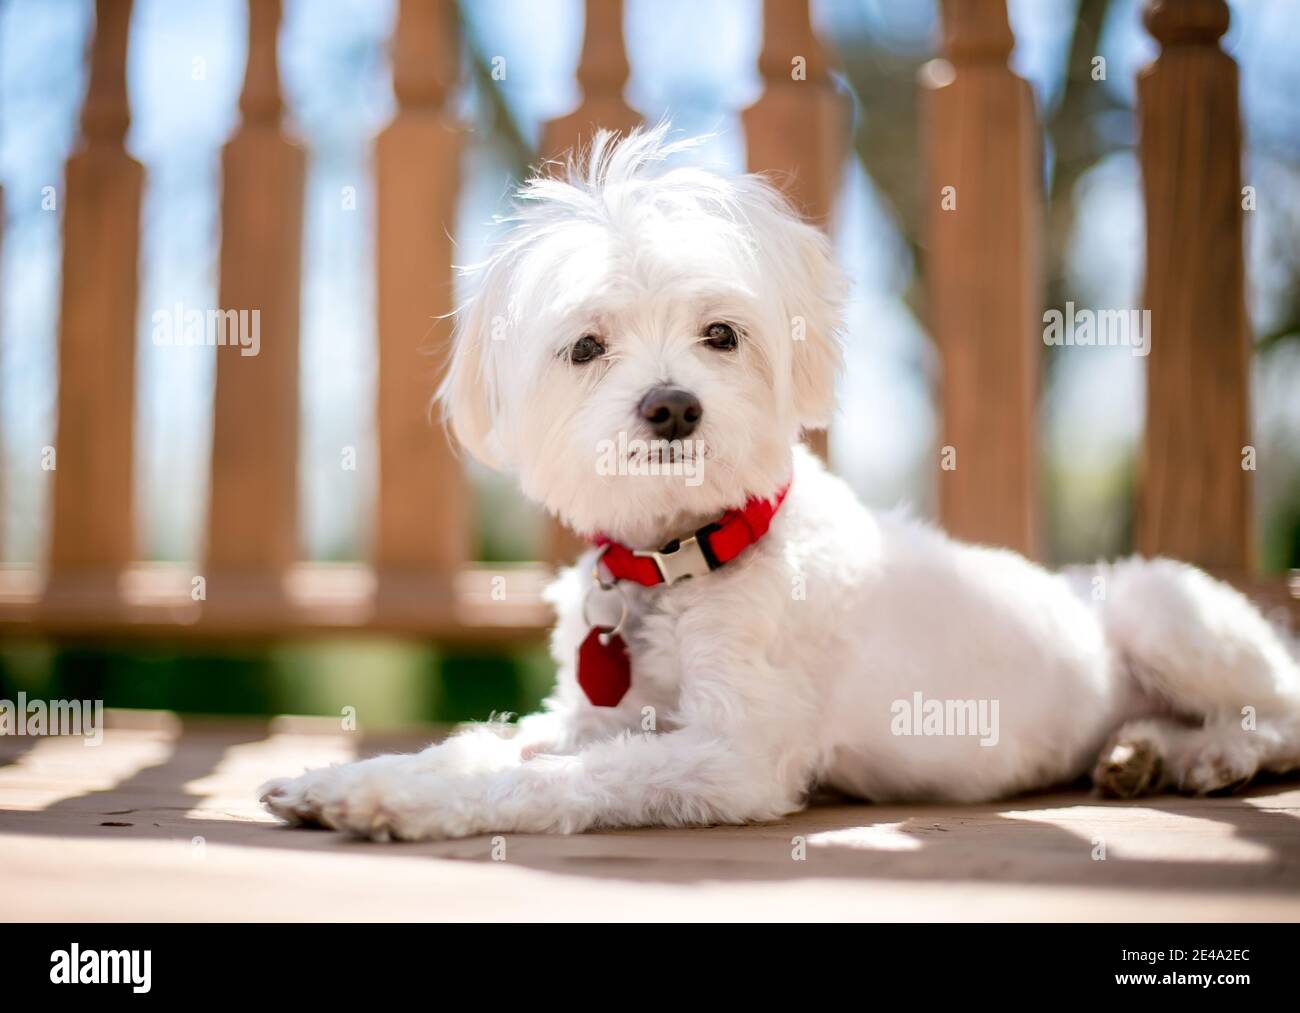 A scruffy white Maltese dog wearing a red collar and identification tag, lying down outdoors Stock Photo